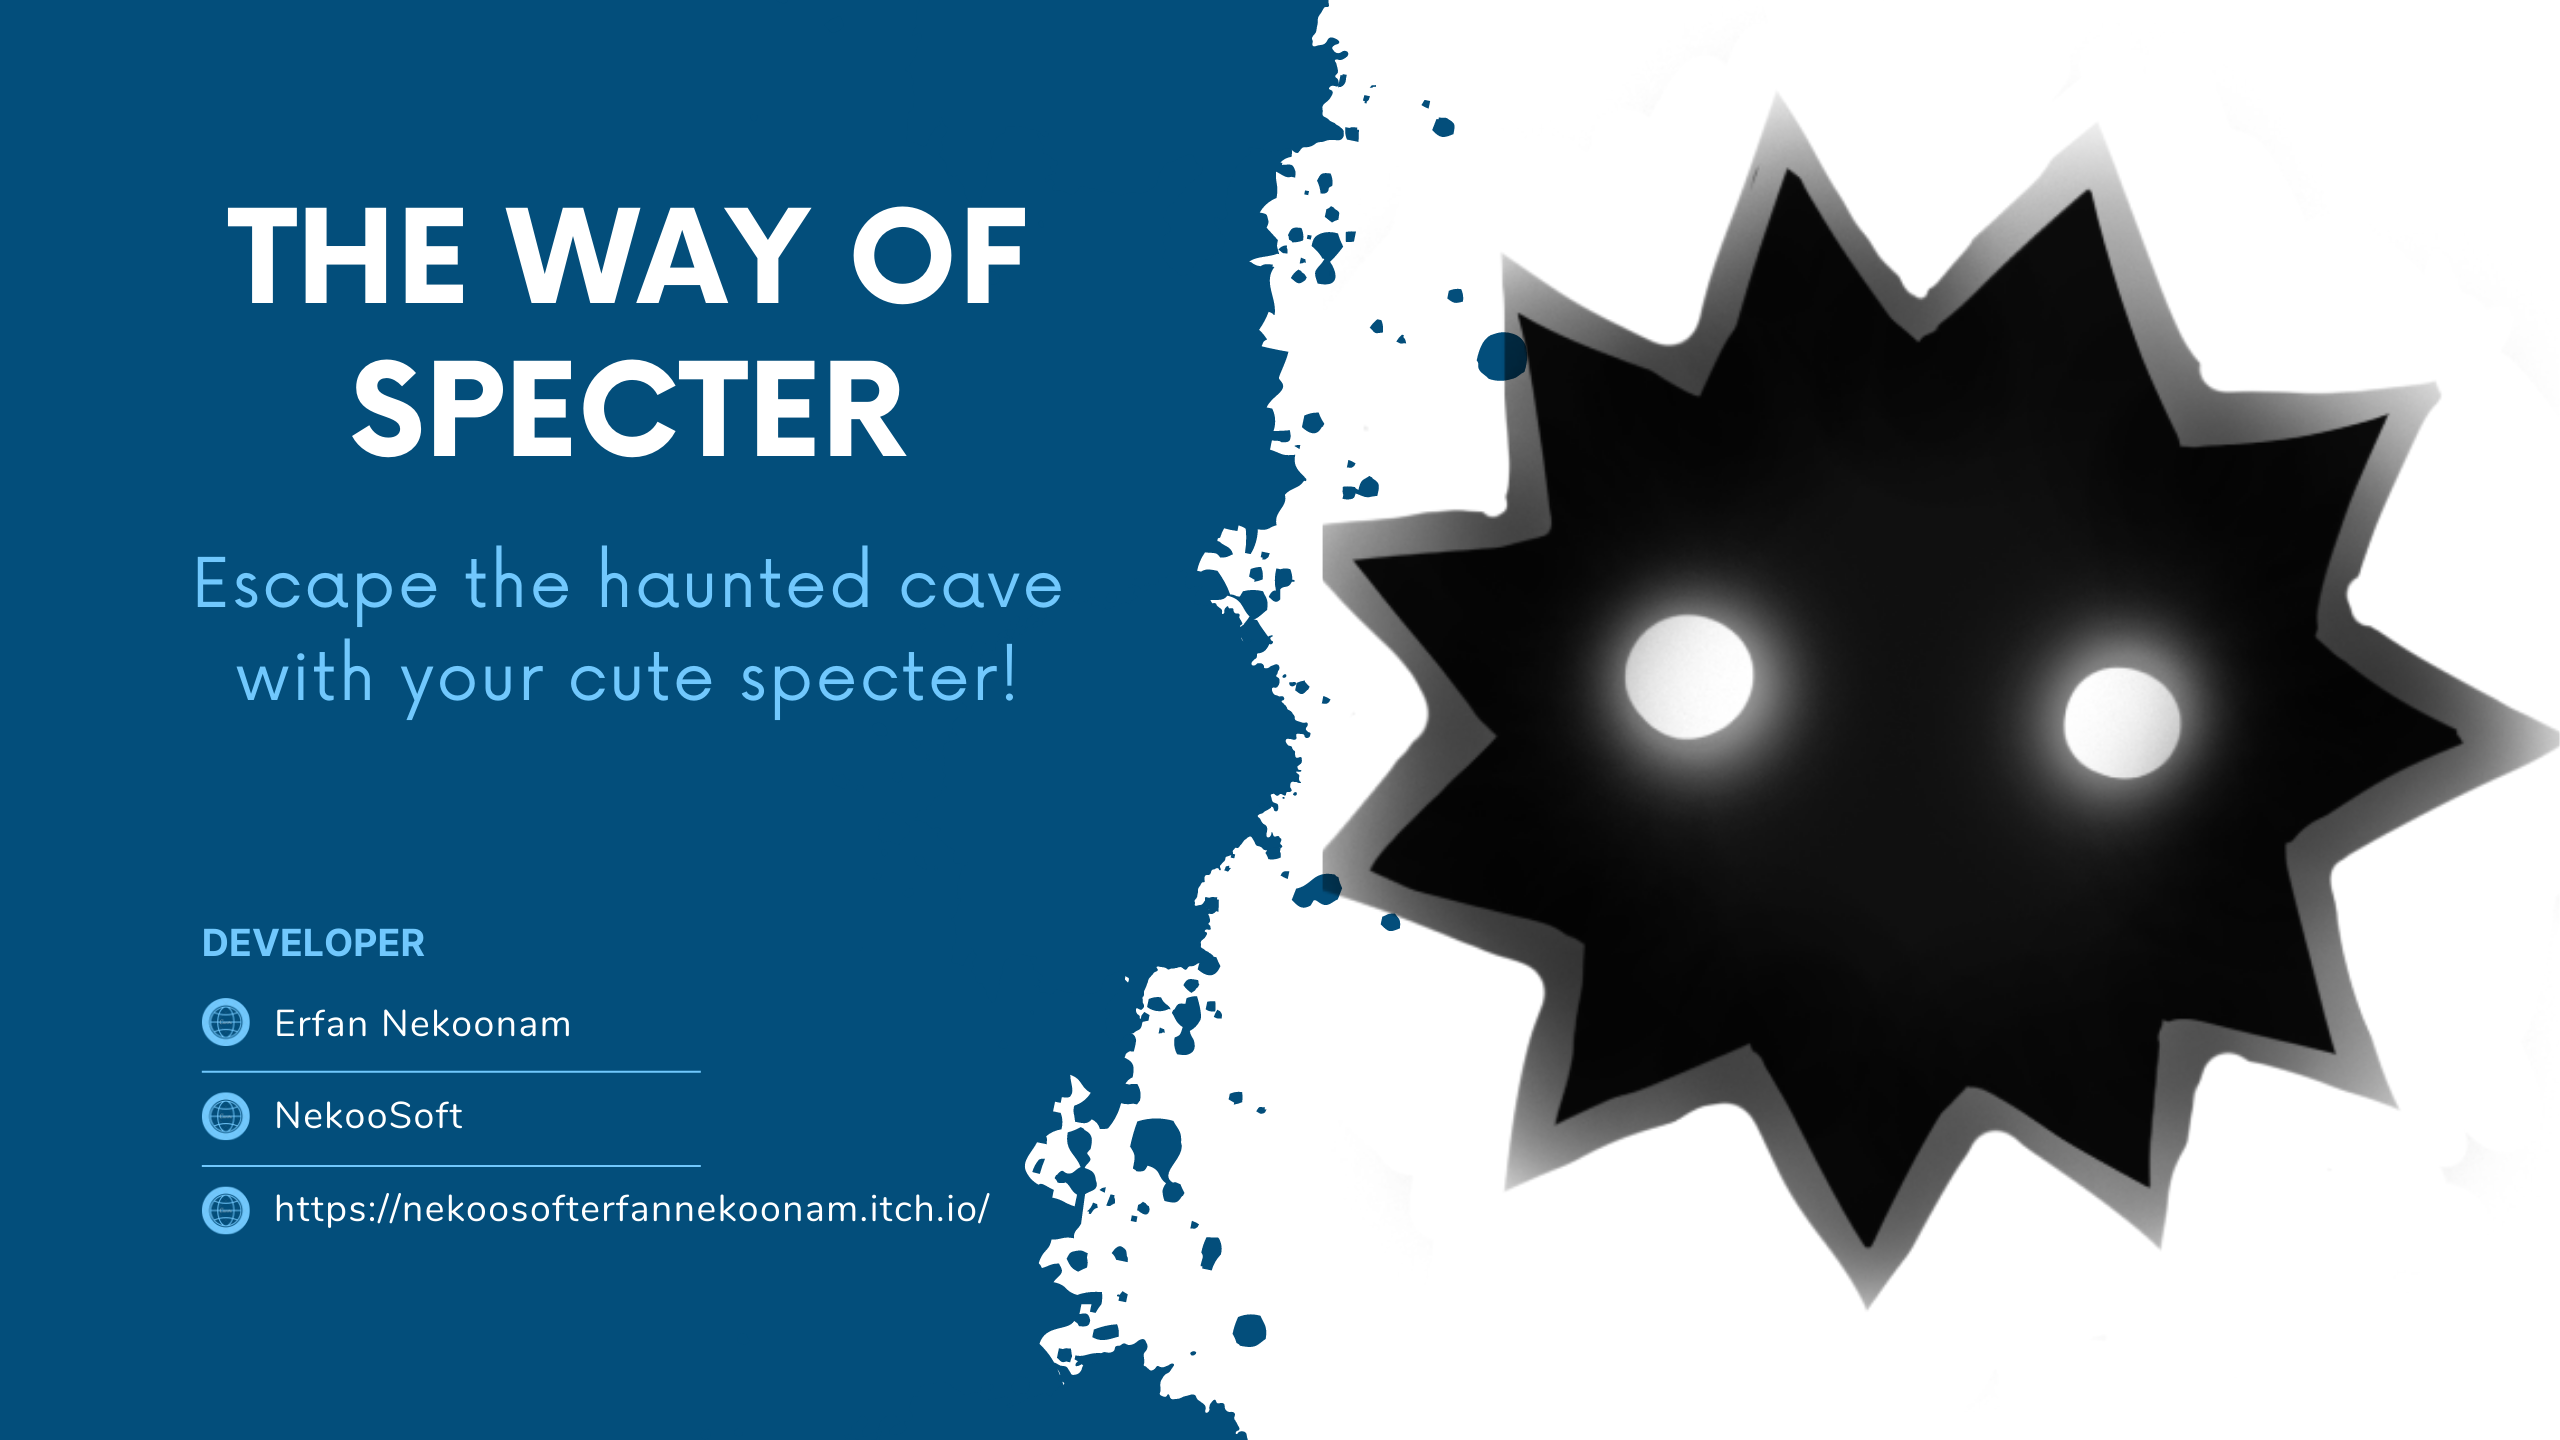 The Way of Specter